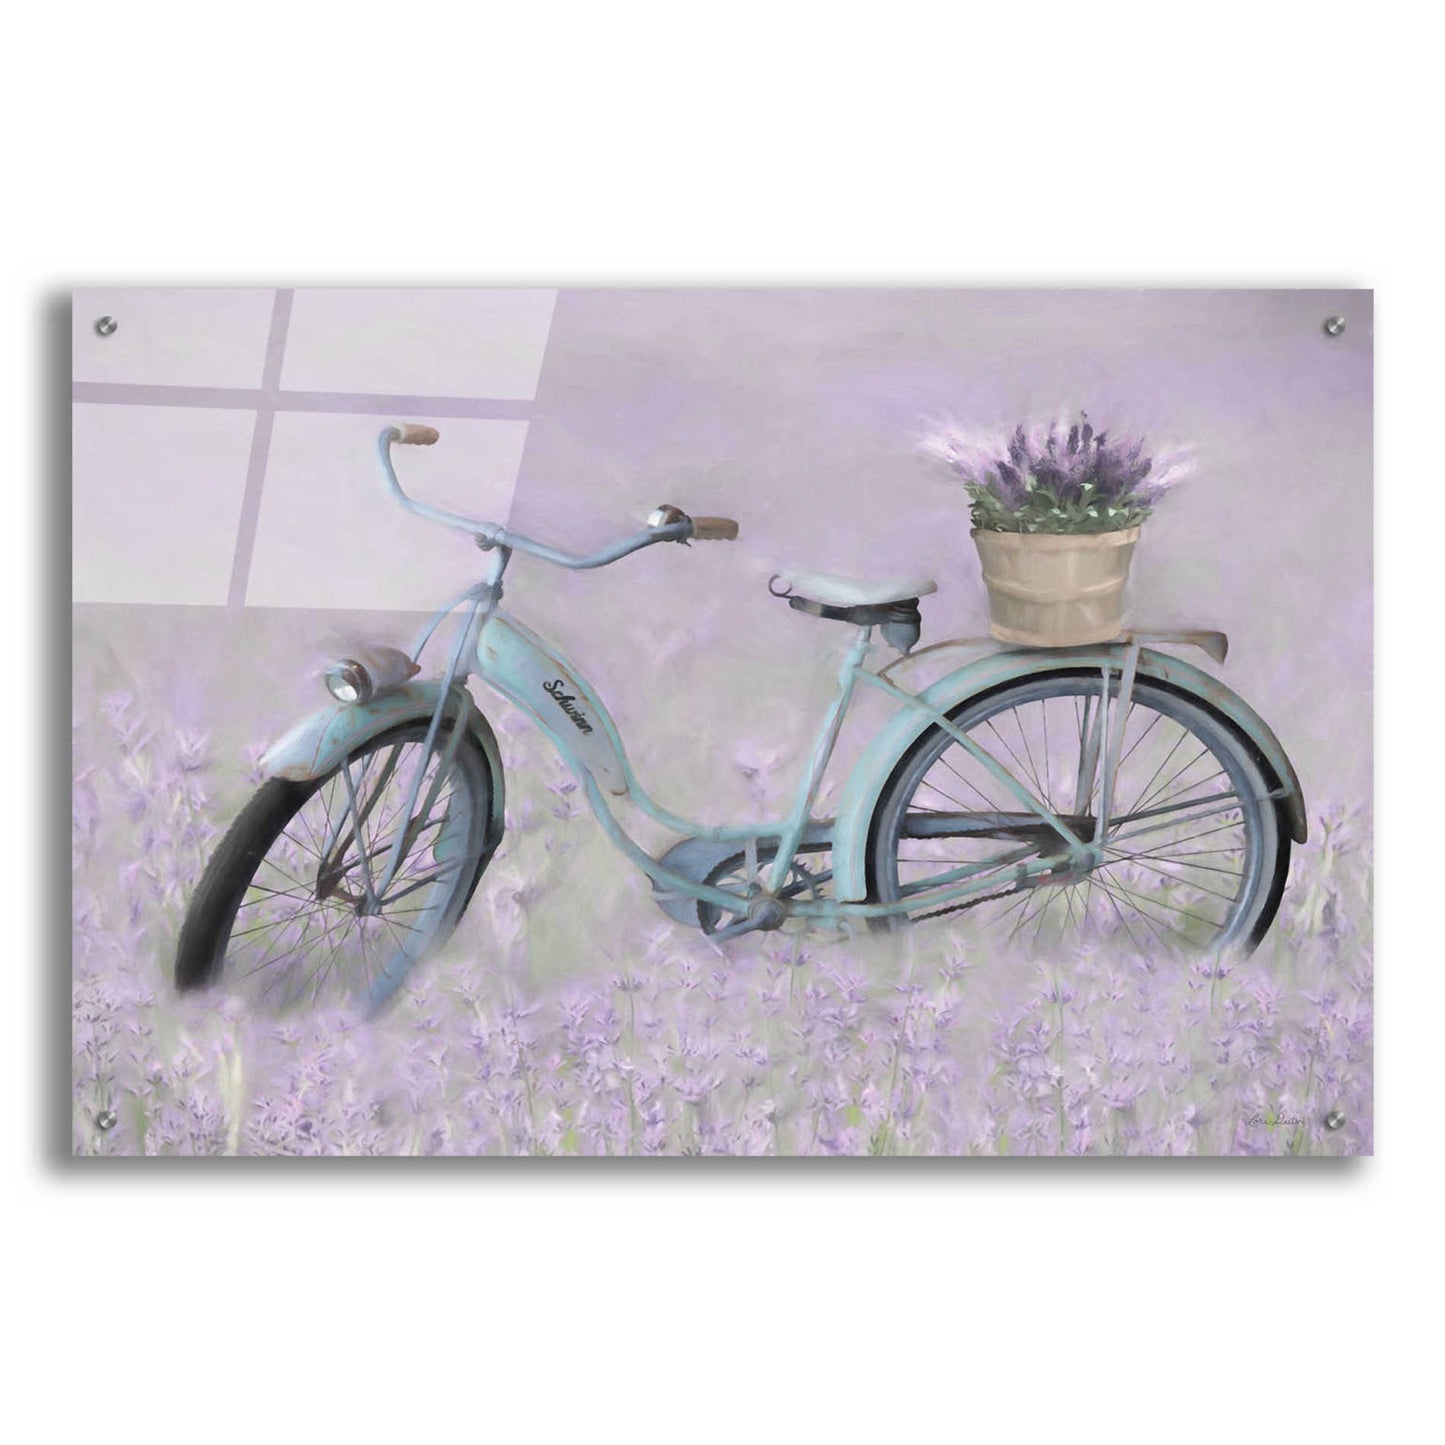 Epic Art 'Bicycle in Lavender' by Lori Deiter Acrylic Glass Wall Art,36x24